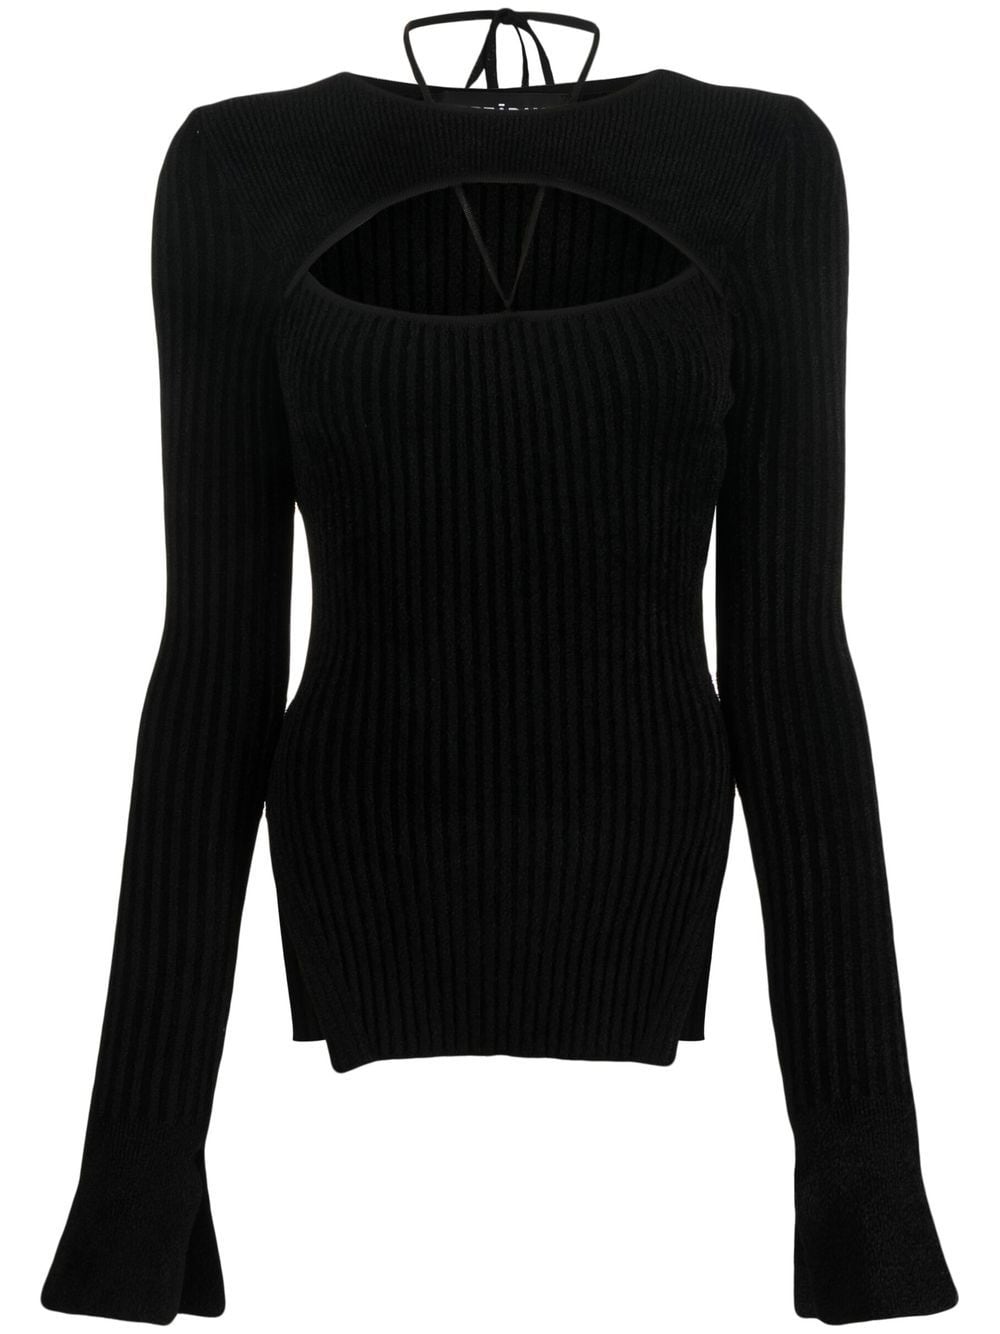 ANDREĀDAMO Ribbed Knit cut-out Top - Farfetch